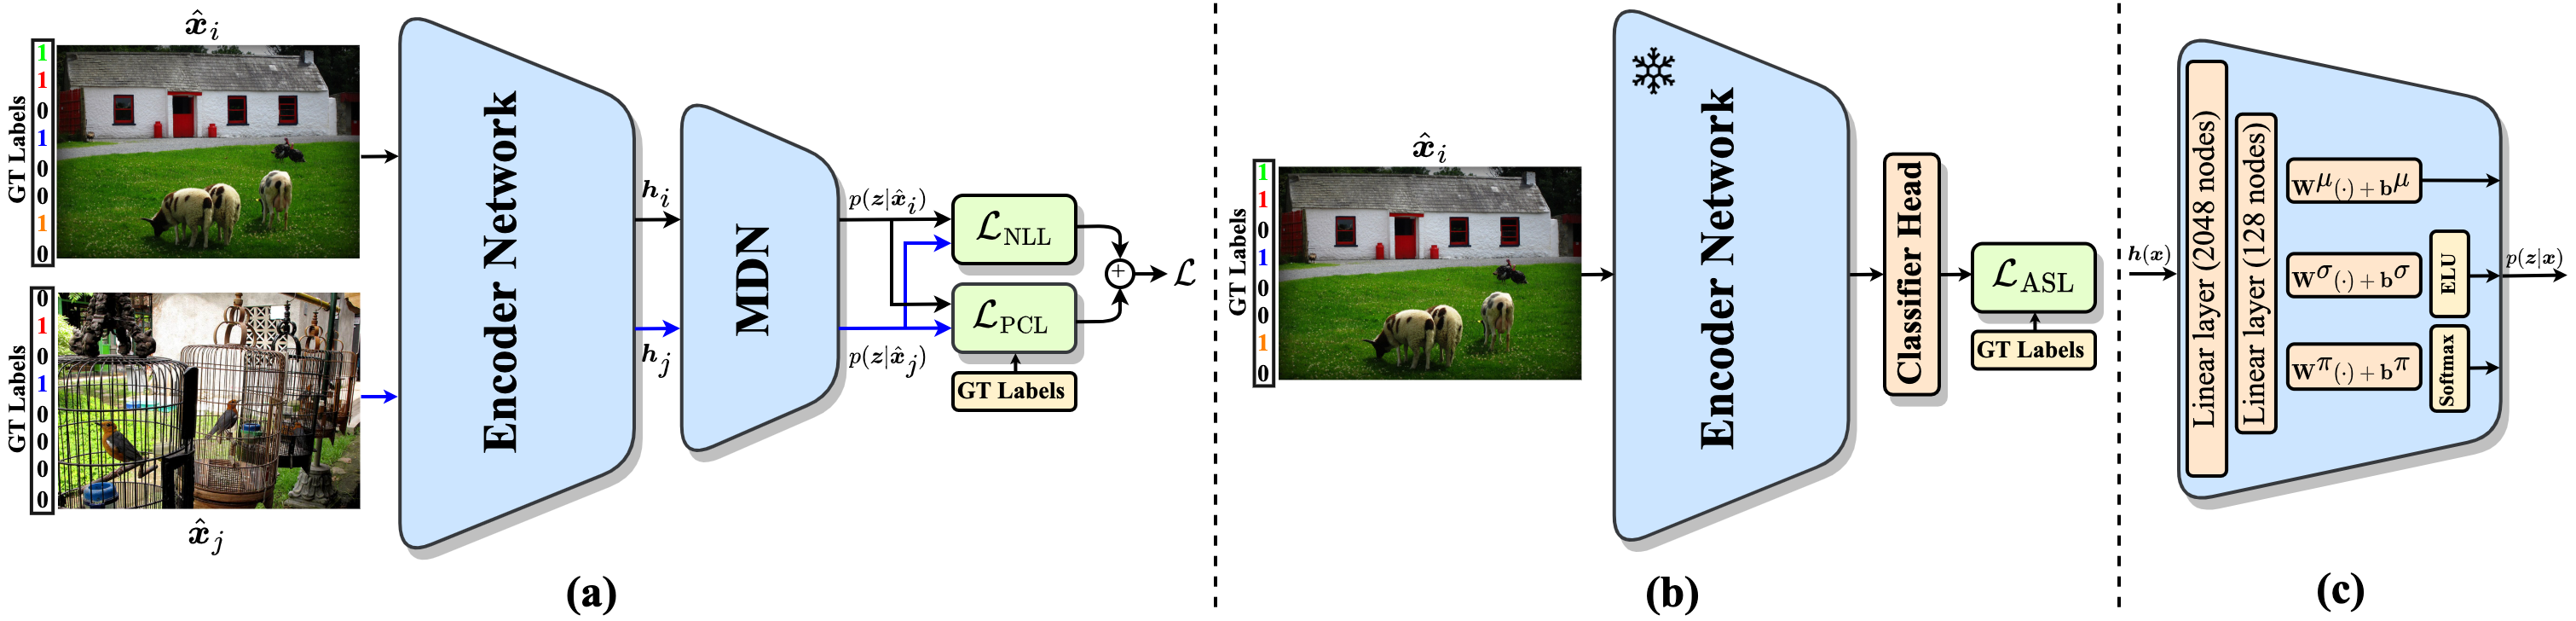 ProbMCL: Simple Probabilistic Contrastive Learning for Multi-label Visual Classification